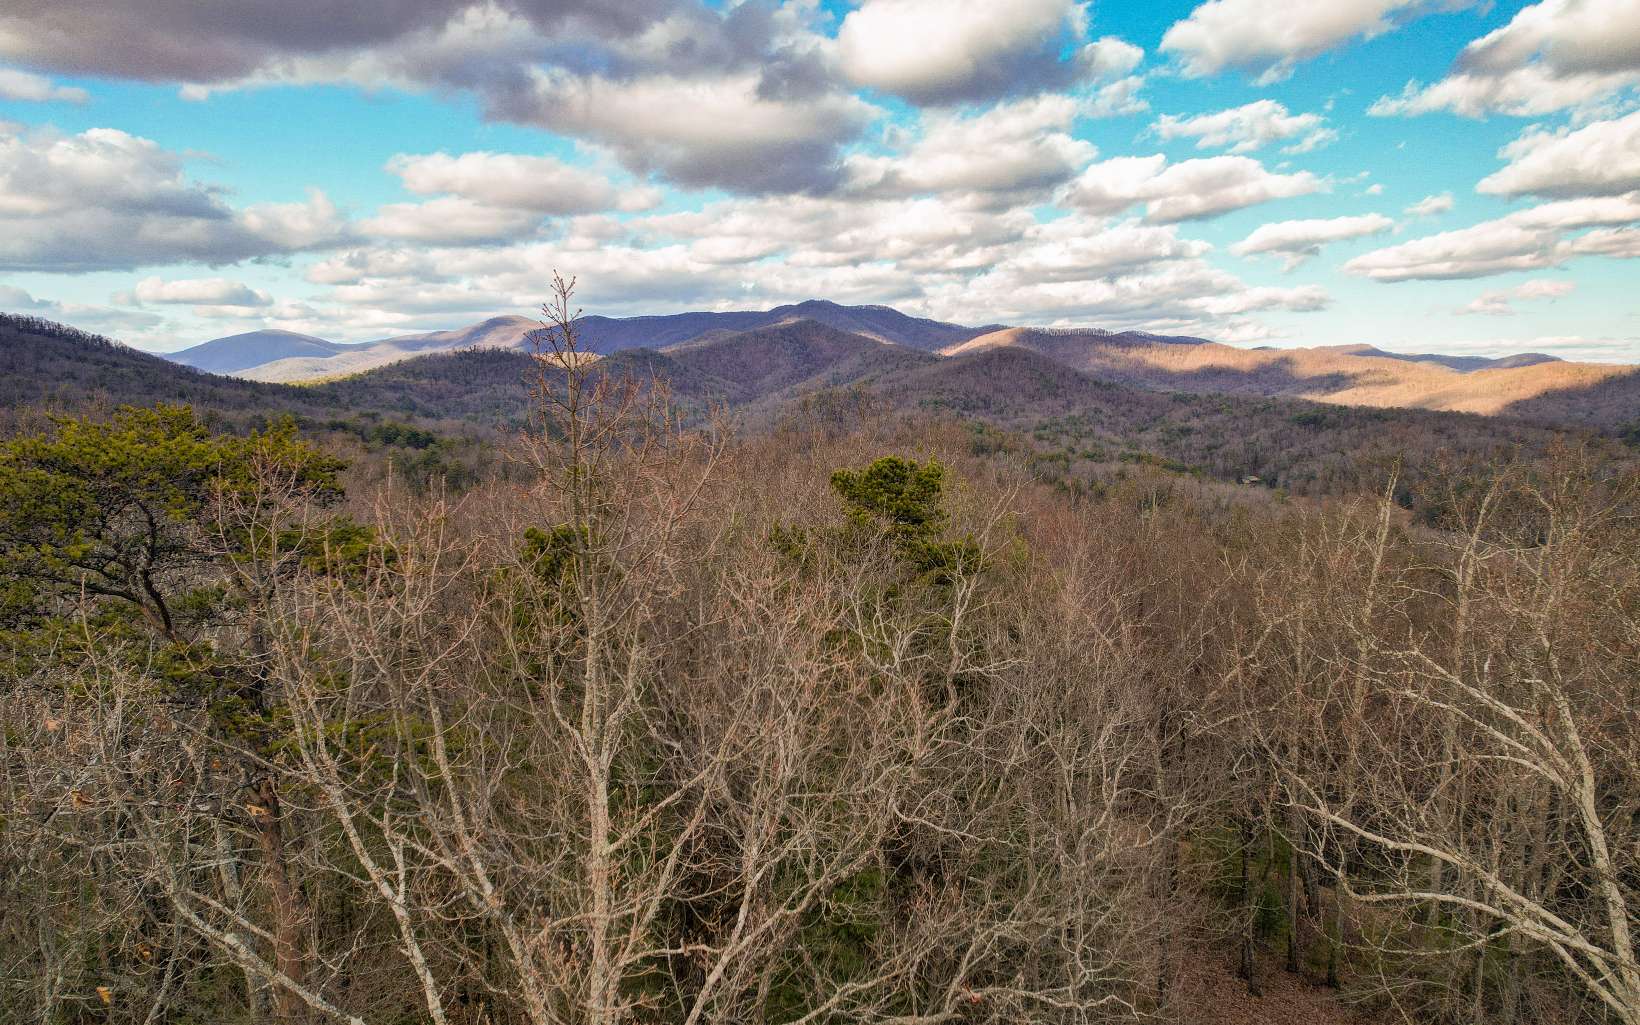 Excellent opportunity to get in on that large mountain tract you've been waiting for! This 36.32 acre property delivers on so many levels... panoramic mountain views, spring fed creeks and streams, well-maintained gravel roads (yes, a 2WD car can make it up), privacy, close to town, flowering mountain laurel's, giant hardwoods, and abundant wildlife! From the flat-top ridge line you can see mountain ranges as far as the eye can see, just imagine it! Whether you desire land all for yourself, a family compound, or development opportunity... the sky's the limit here. Located 5 miles from charming downtown Ellijay with boutique shopping and 5 star restaurants; but feels a world away! It's time!